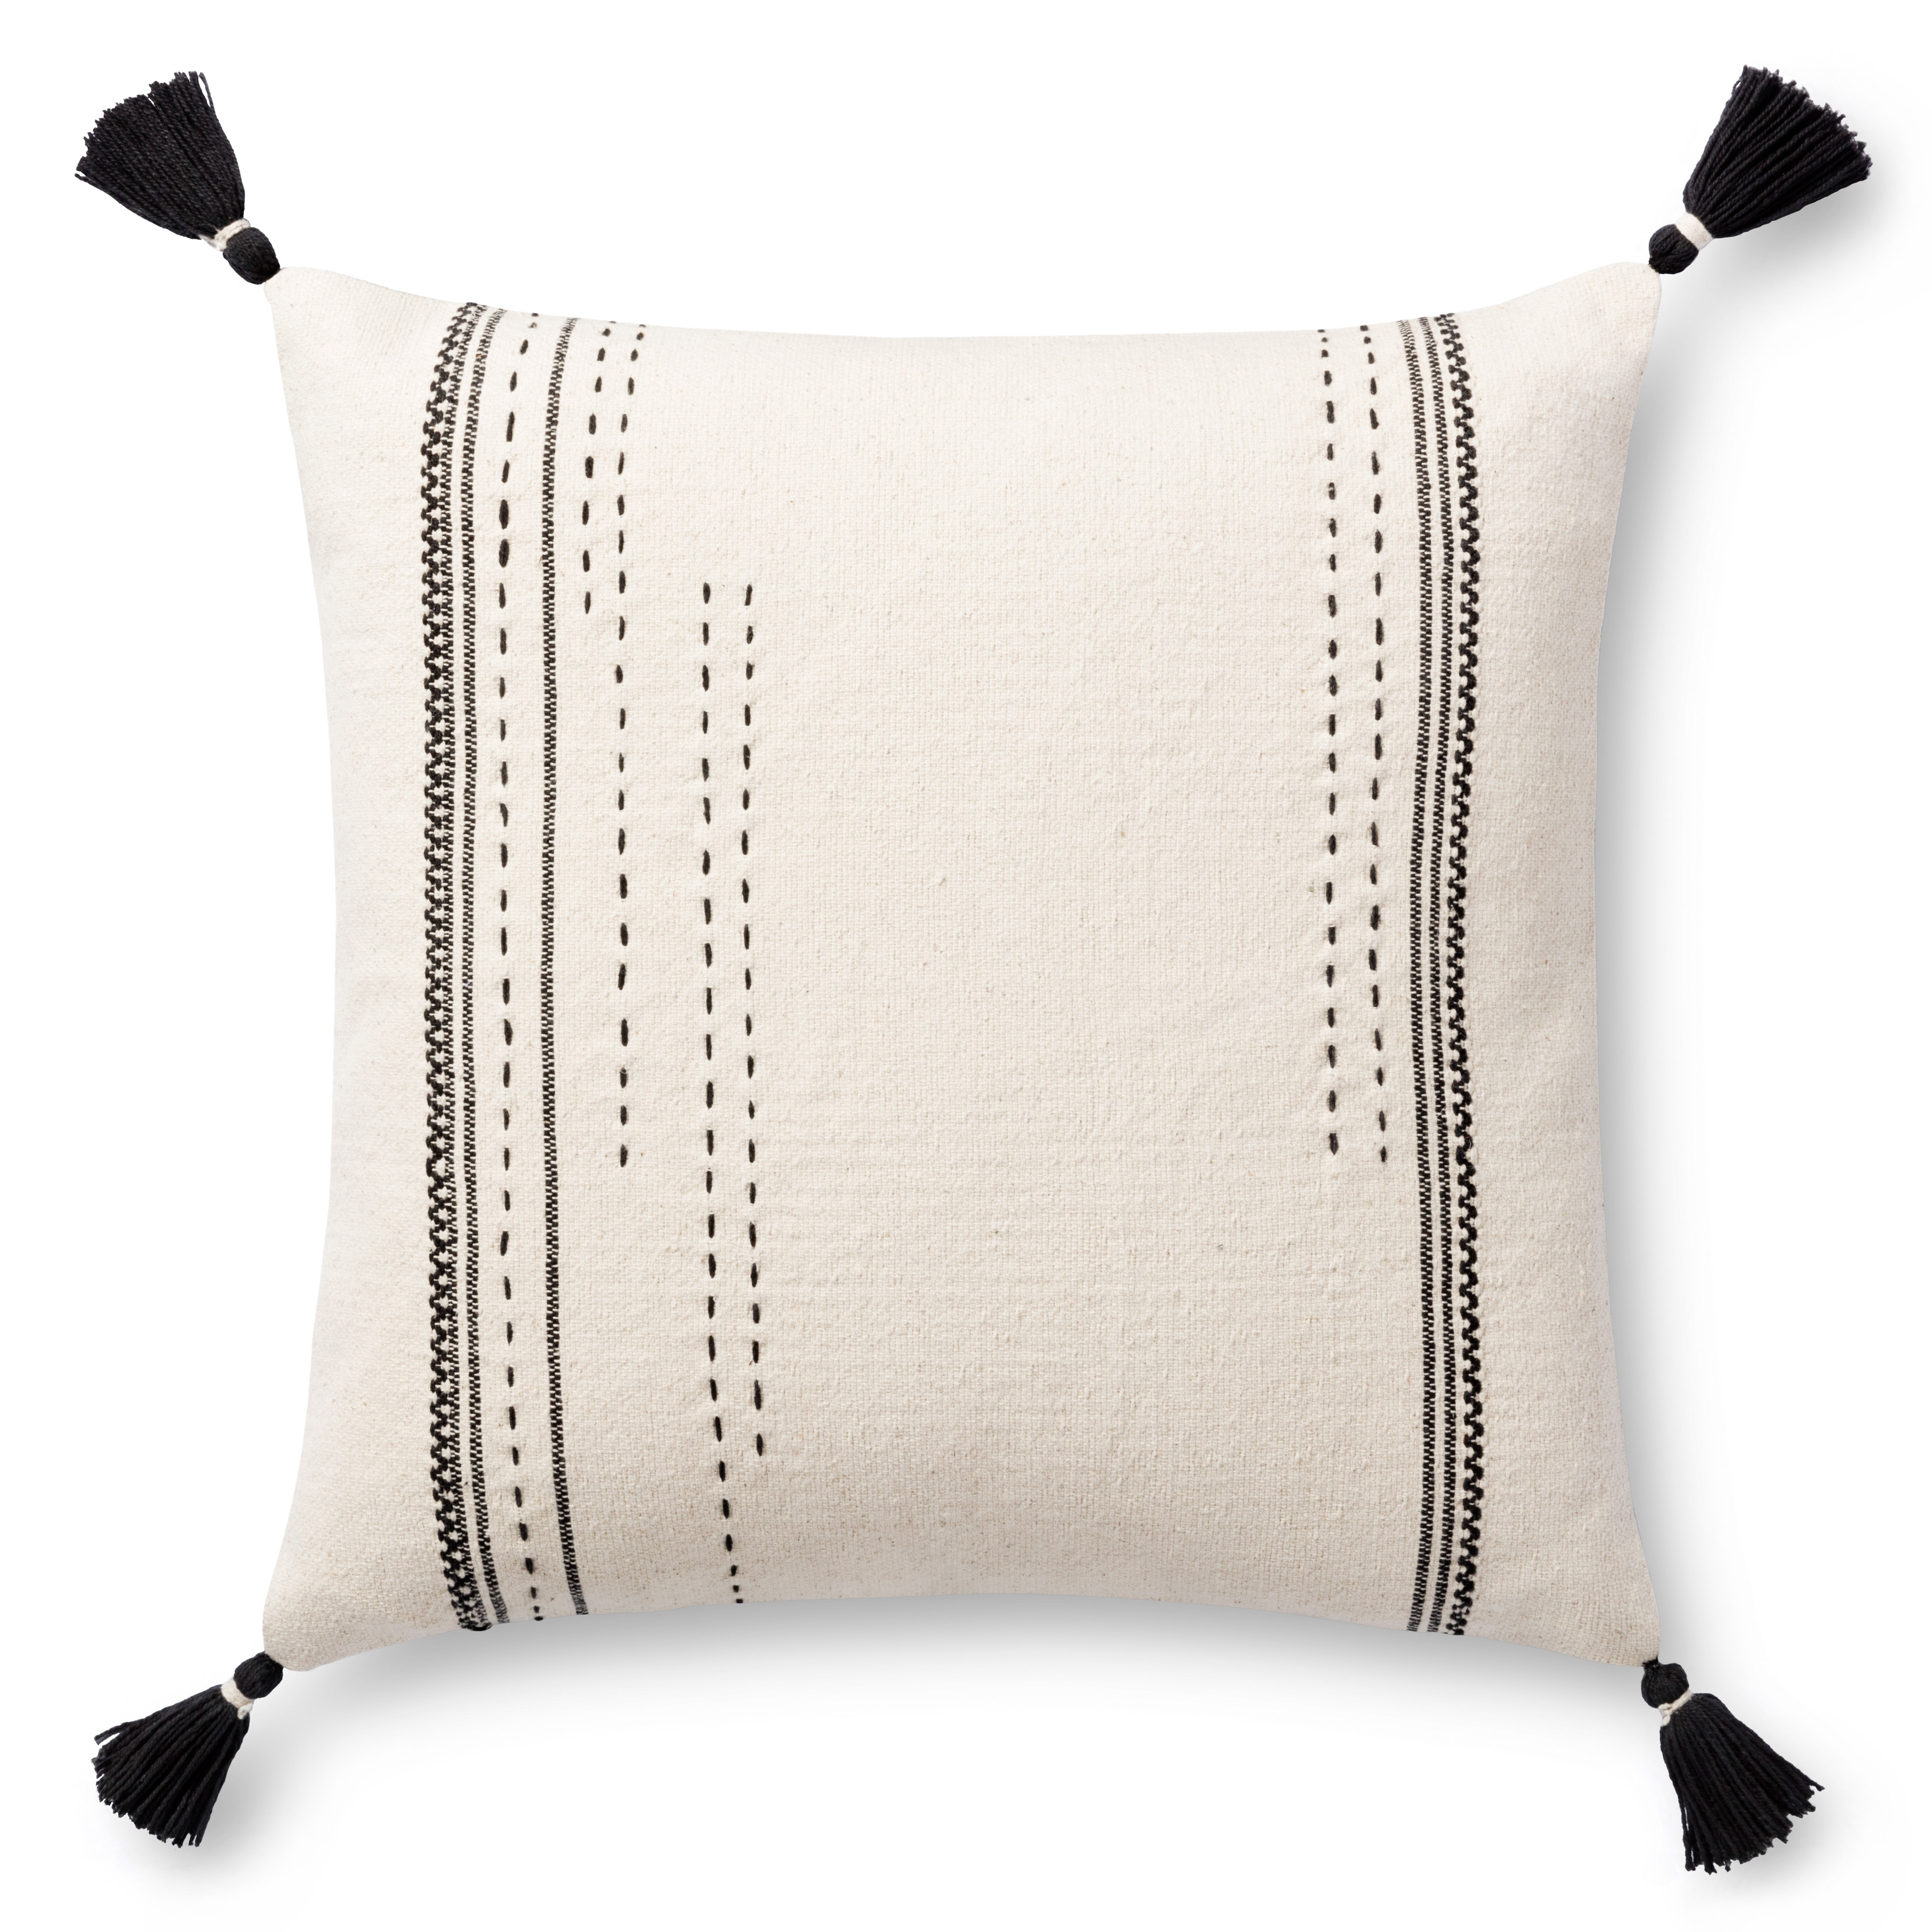 PILLOWS P1149 NATURAL / BLACK 18" x 18" Cover w/Poly - Image 0